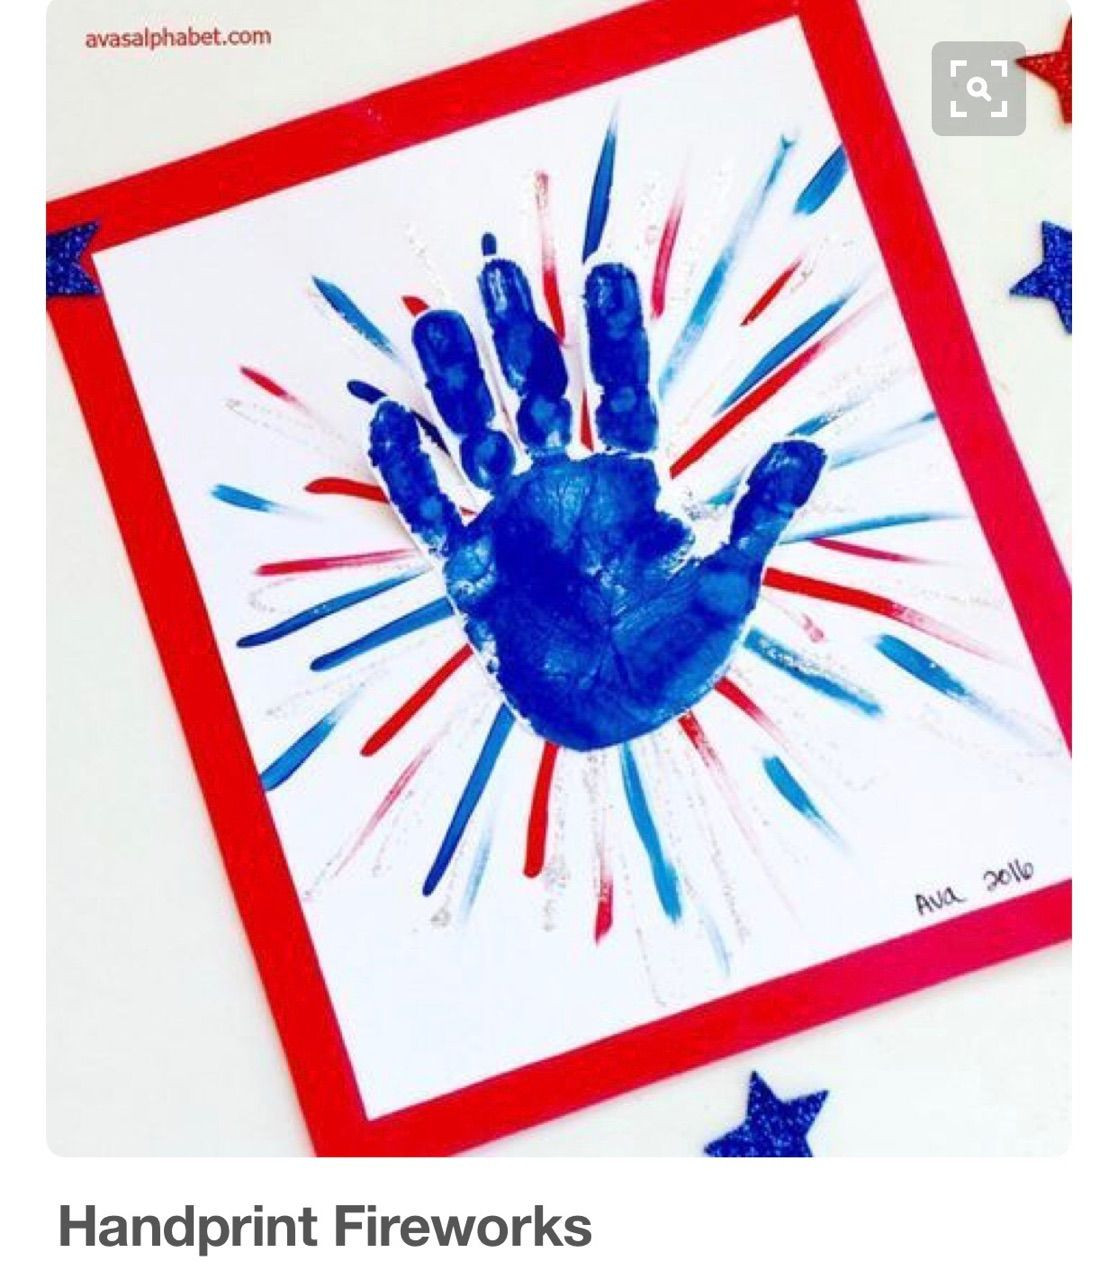 Memorial Day Crafts For Preschool
 Easy Memorial Day Crafts Ideas for Kids Toddlers Adults